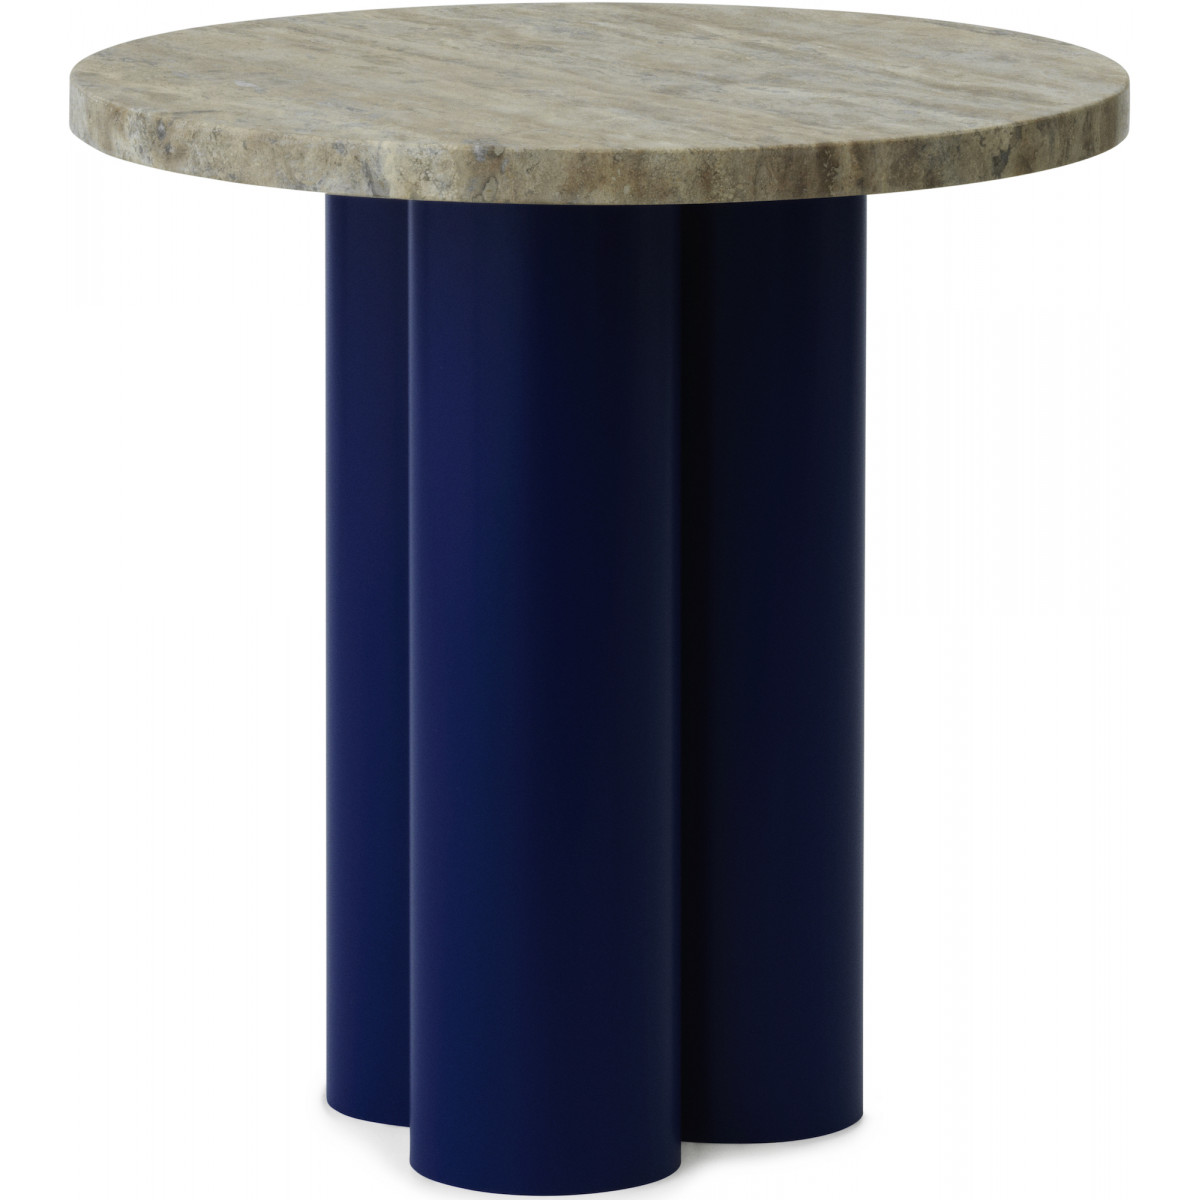 Dit Table – Bright Blue Frame + Travertine Silver Tabletop